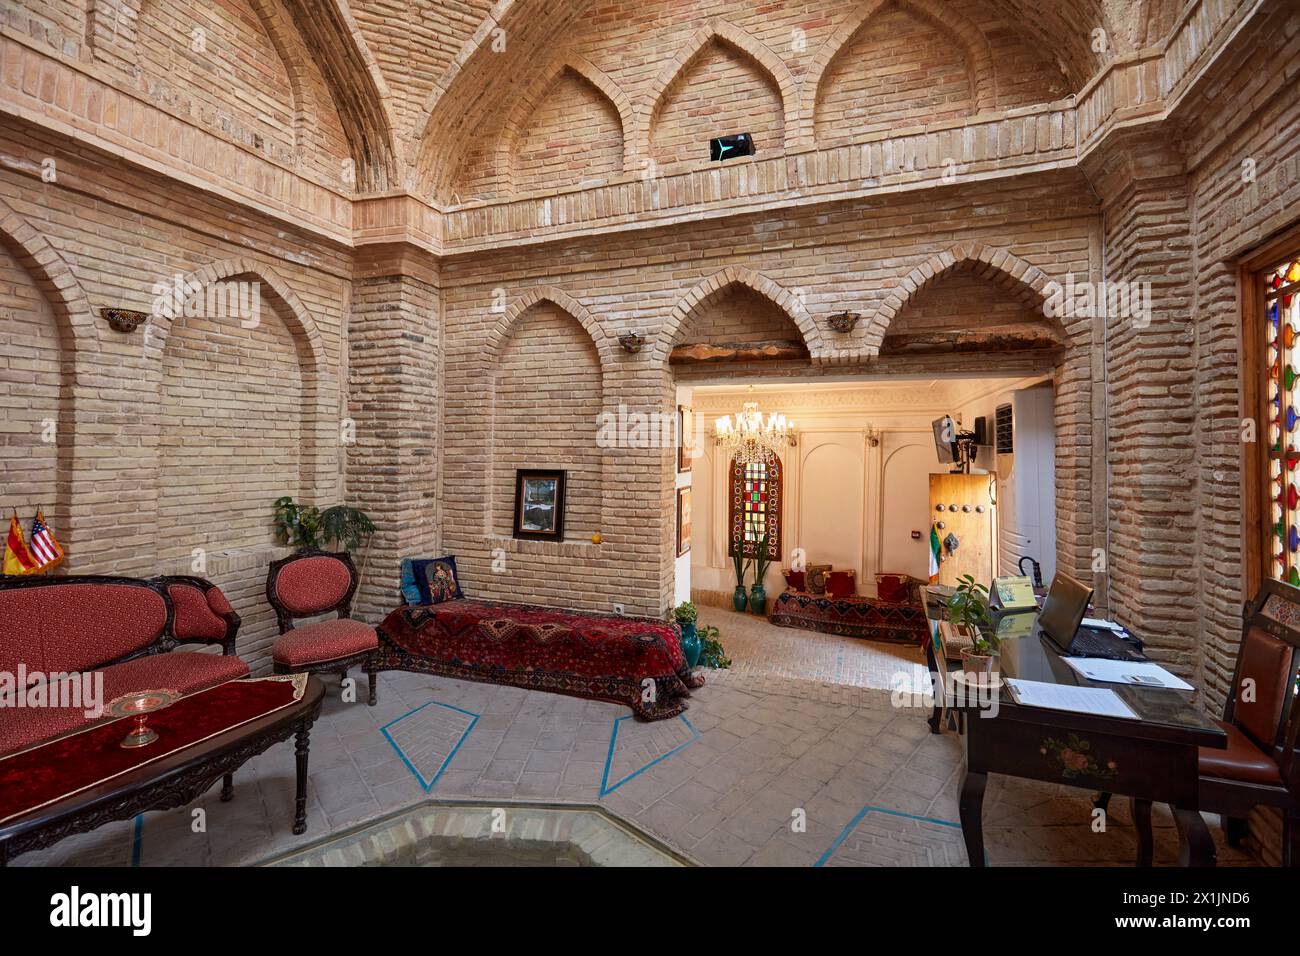 Interior view of a traditional rich Iranian house now turned into an upscale boutique hotel. Isfahan, Iran. Stock Photo